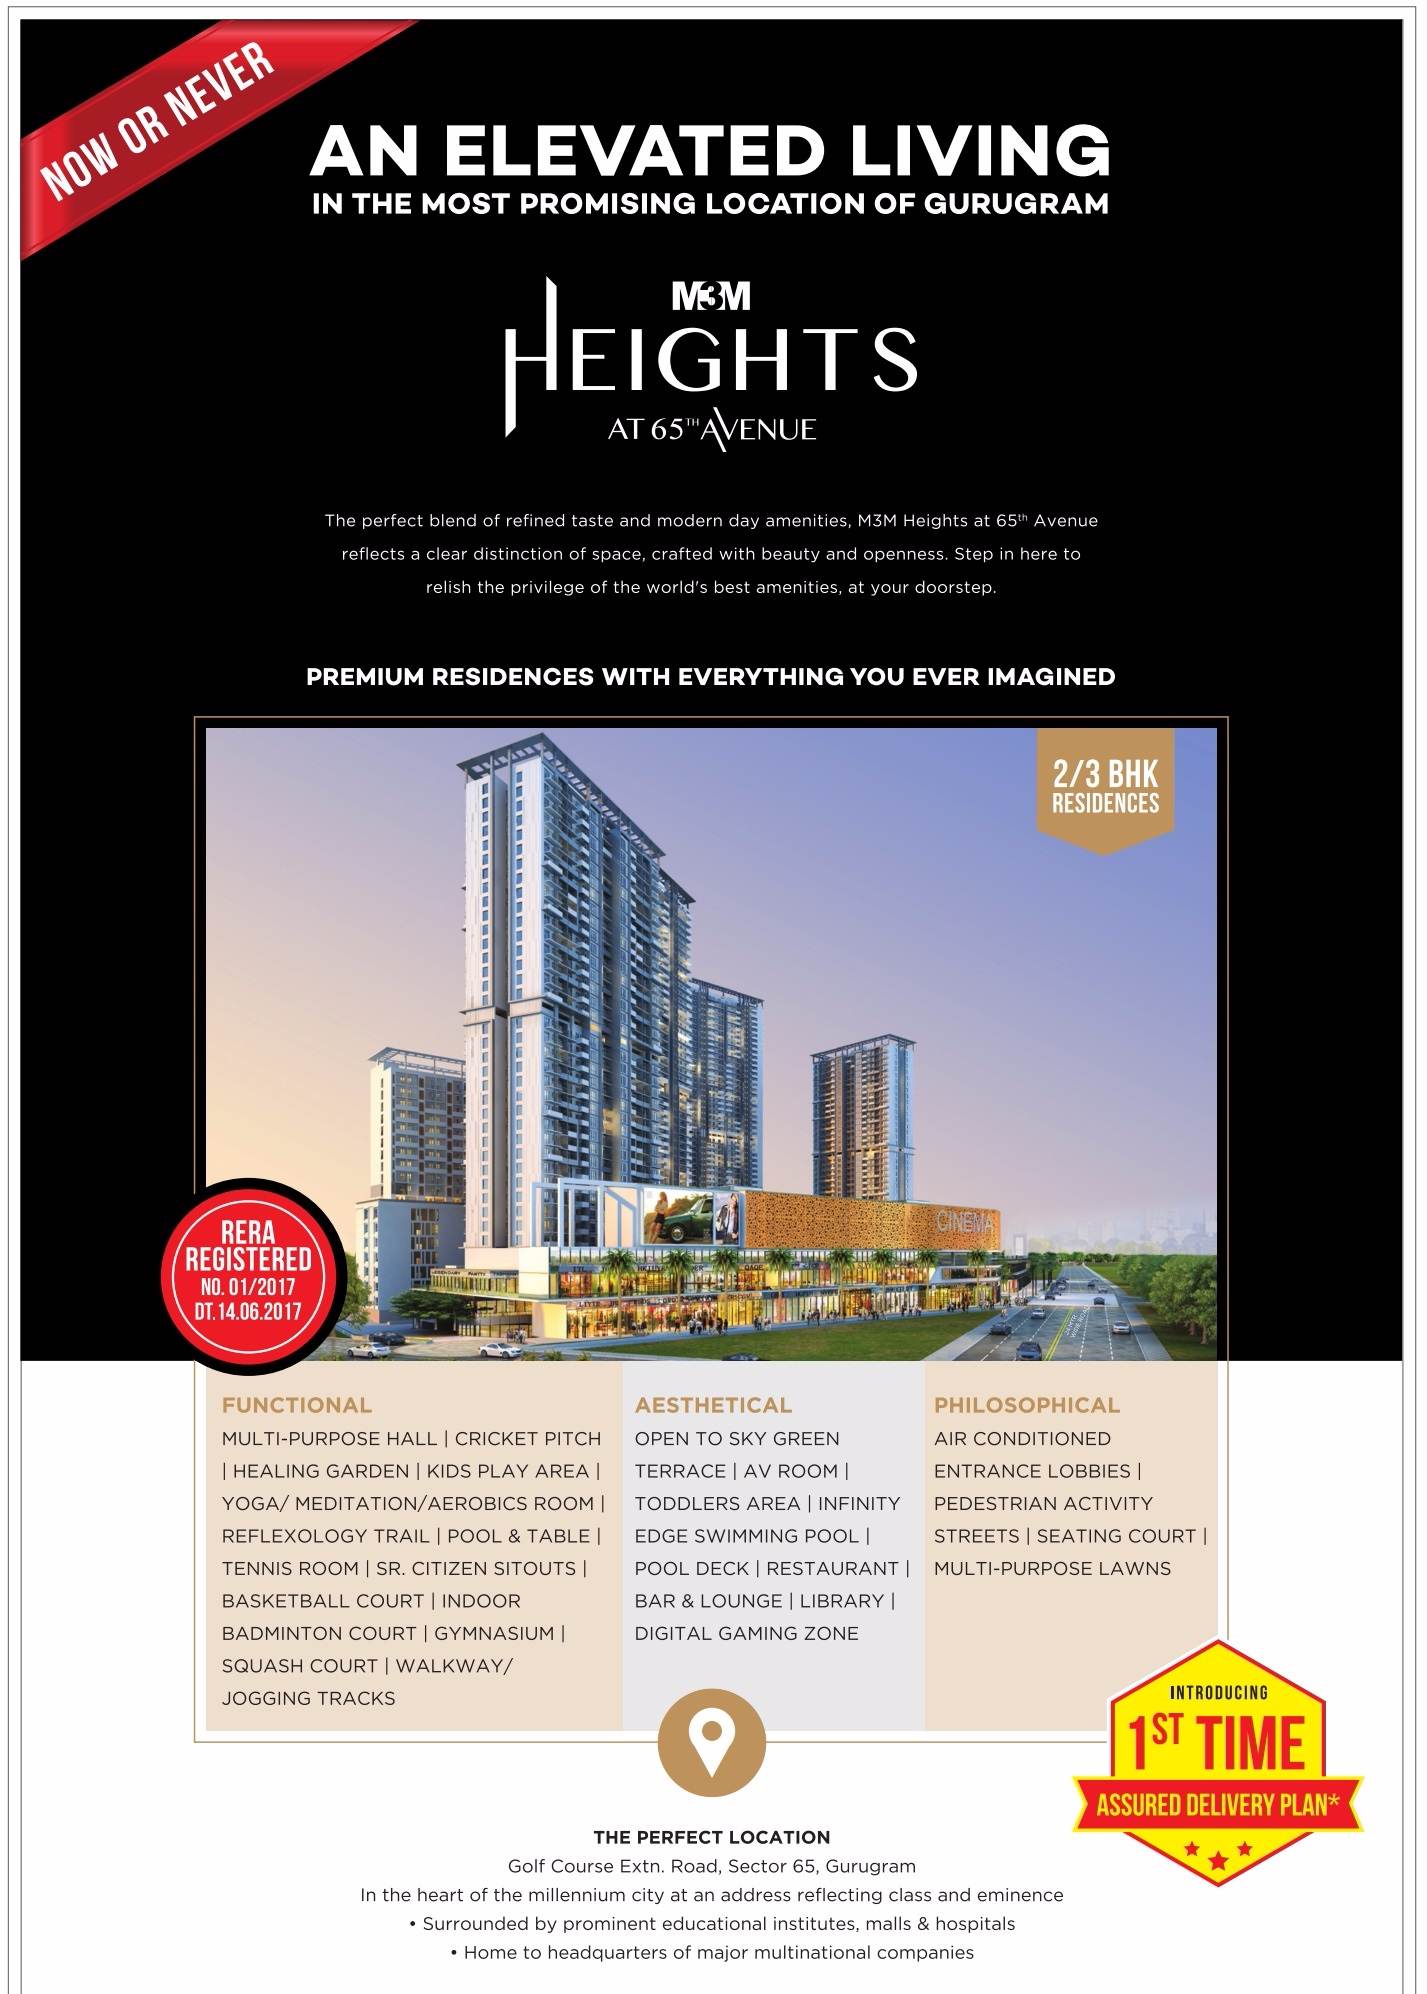 Experience an elevated living with premium residences at M3M Heights 65th Avenue in Gurgaon Update